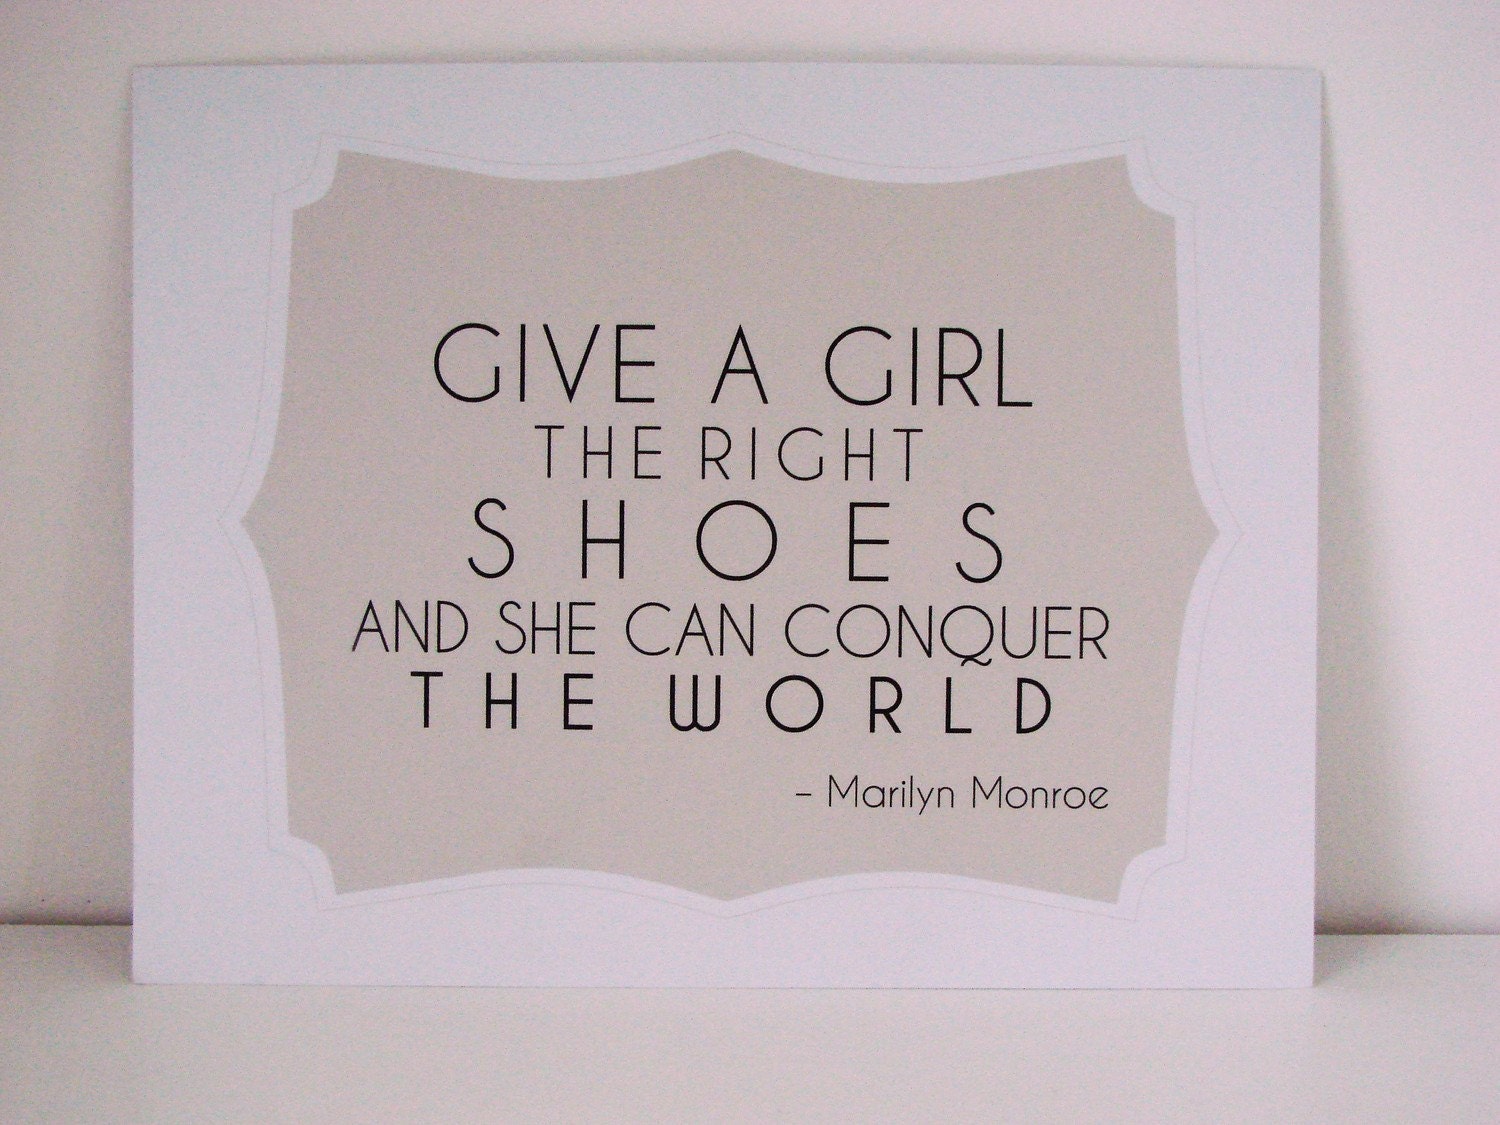 Give A Girl The Right Shoes Marilyn Monroe Quote By Coconutpress 